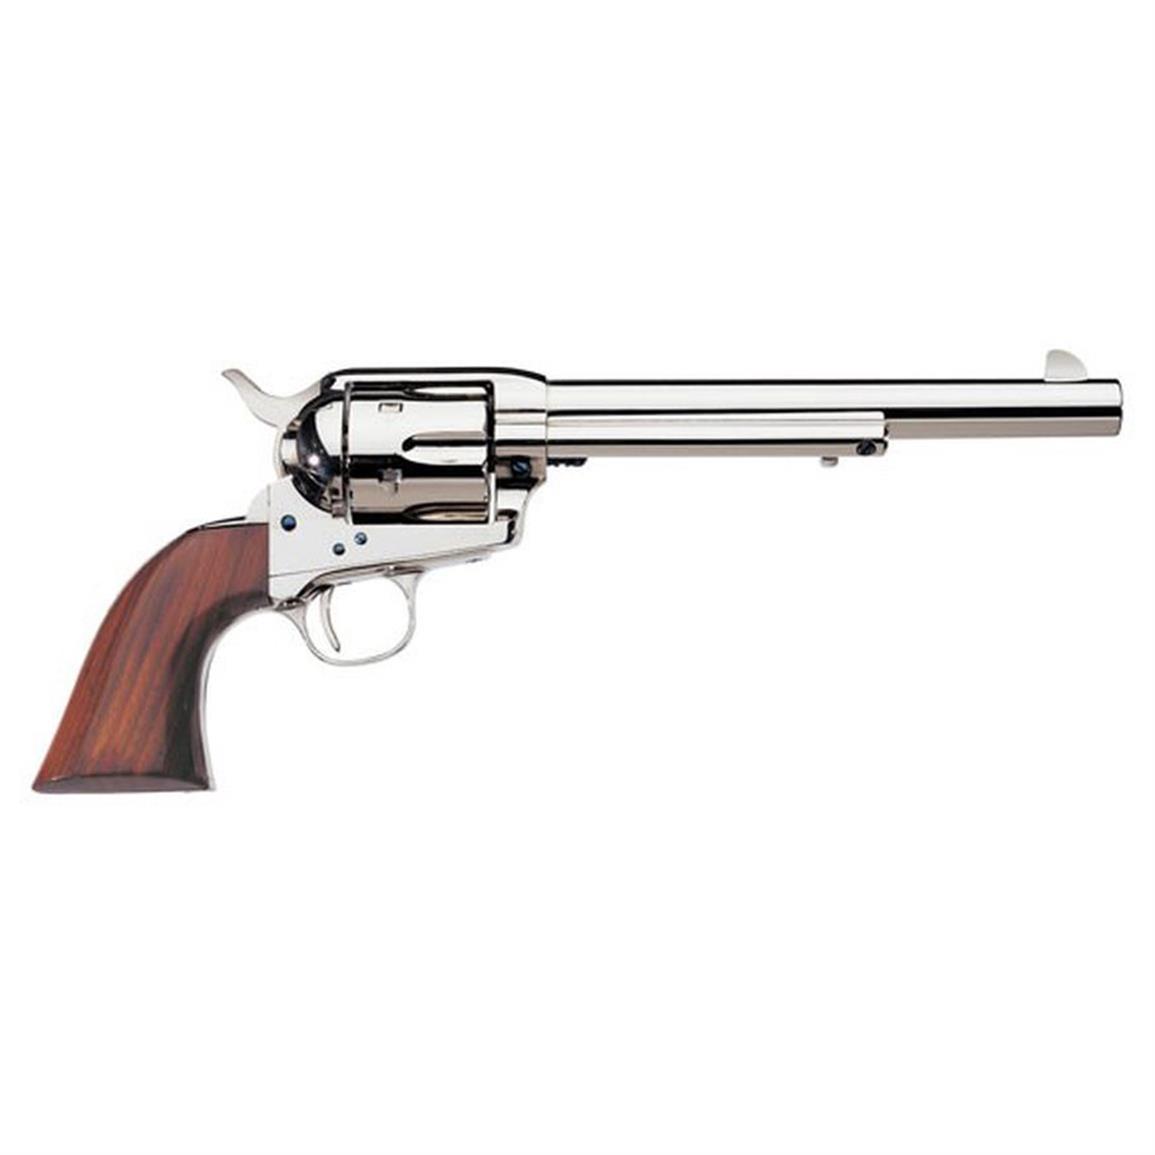 Taylor's & Co. Uberti 1873 Cattleman Nickel Plated ...